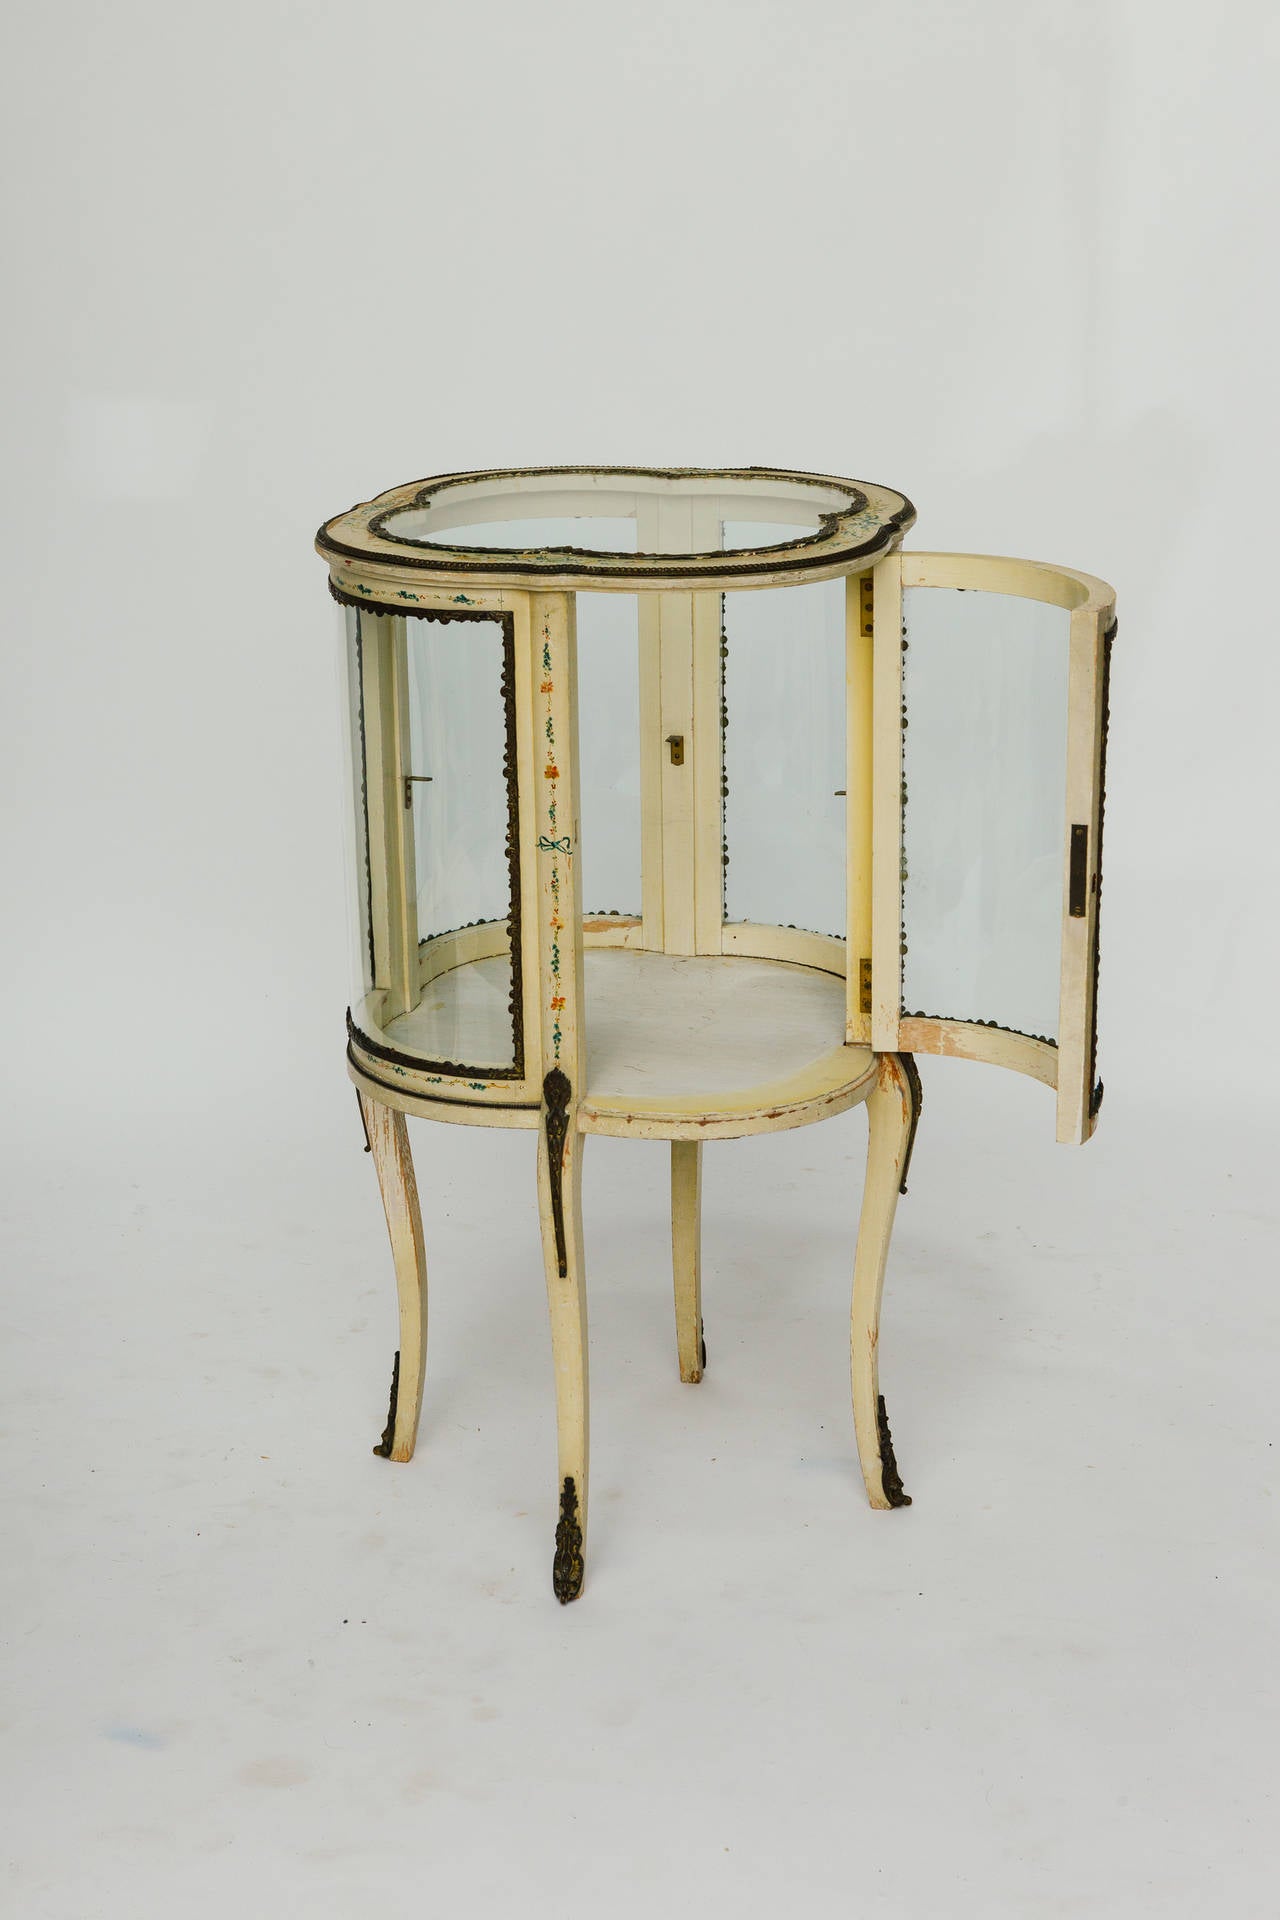 1920s painted vitrine with brass molding. One piece of molding is missing and there is no glass shelf.